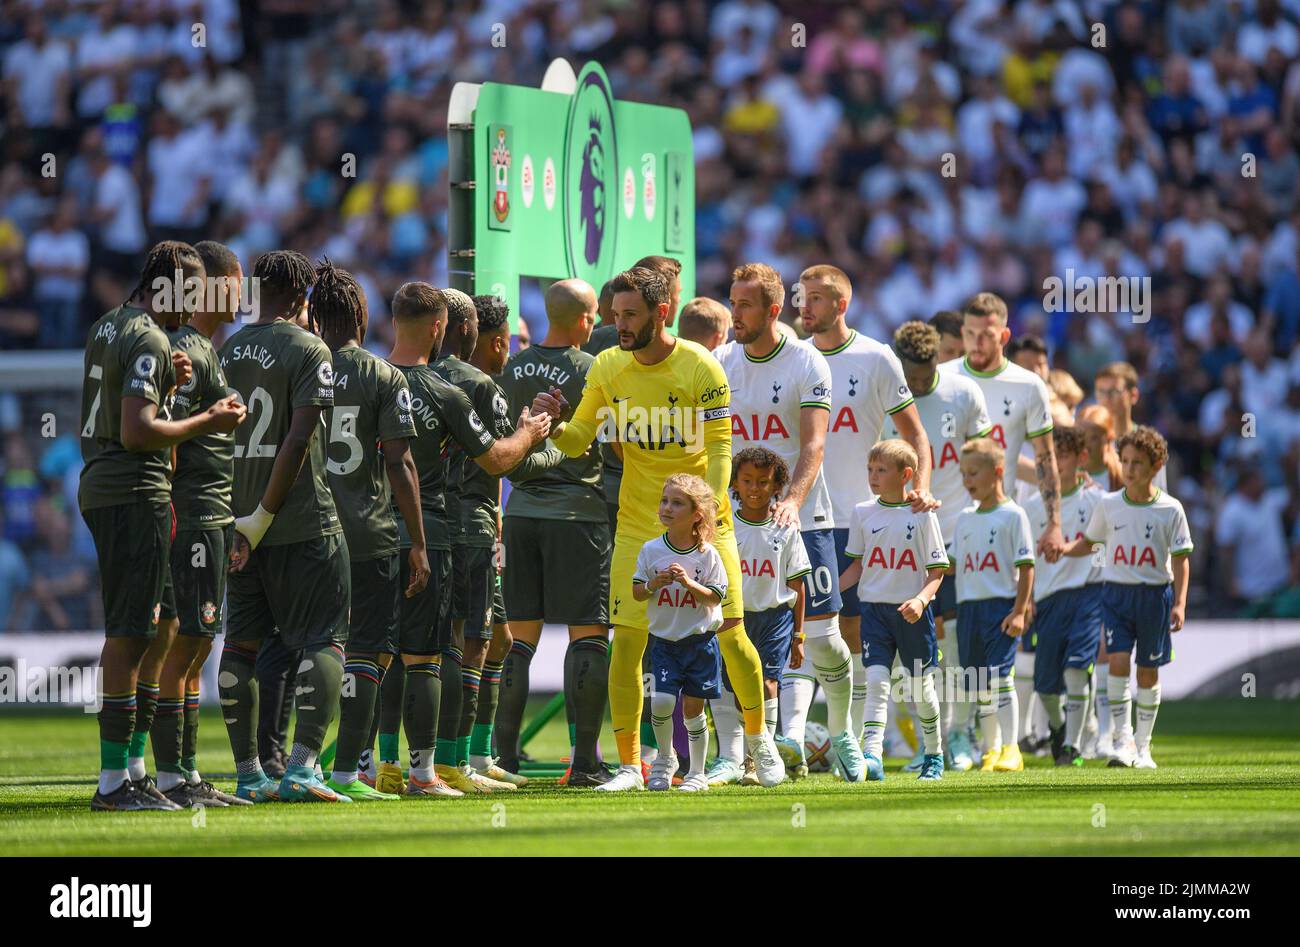 06 Aug 2022 - Tottenham Hotspur v Southampton - Premier League - Tottenham Hotspur Stadium  Tottenham's Captain Hugo Lloris leads his team shaking hands with the oppostion before the match against Southampton Picture Credit : © Mark Pain / Alamy Live News Stock Photo